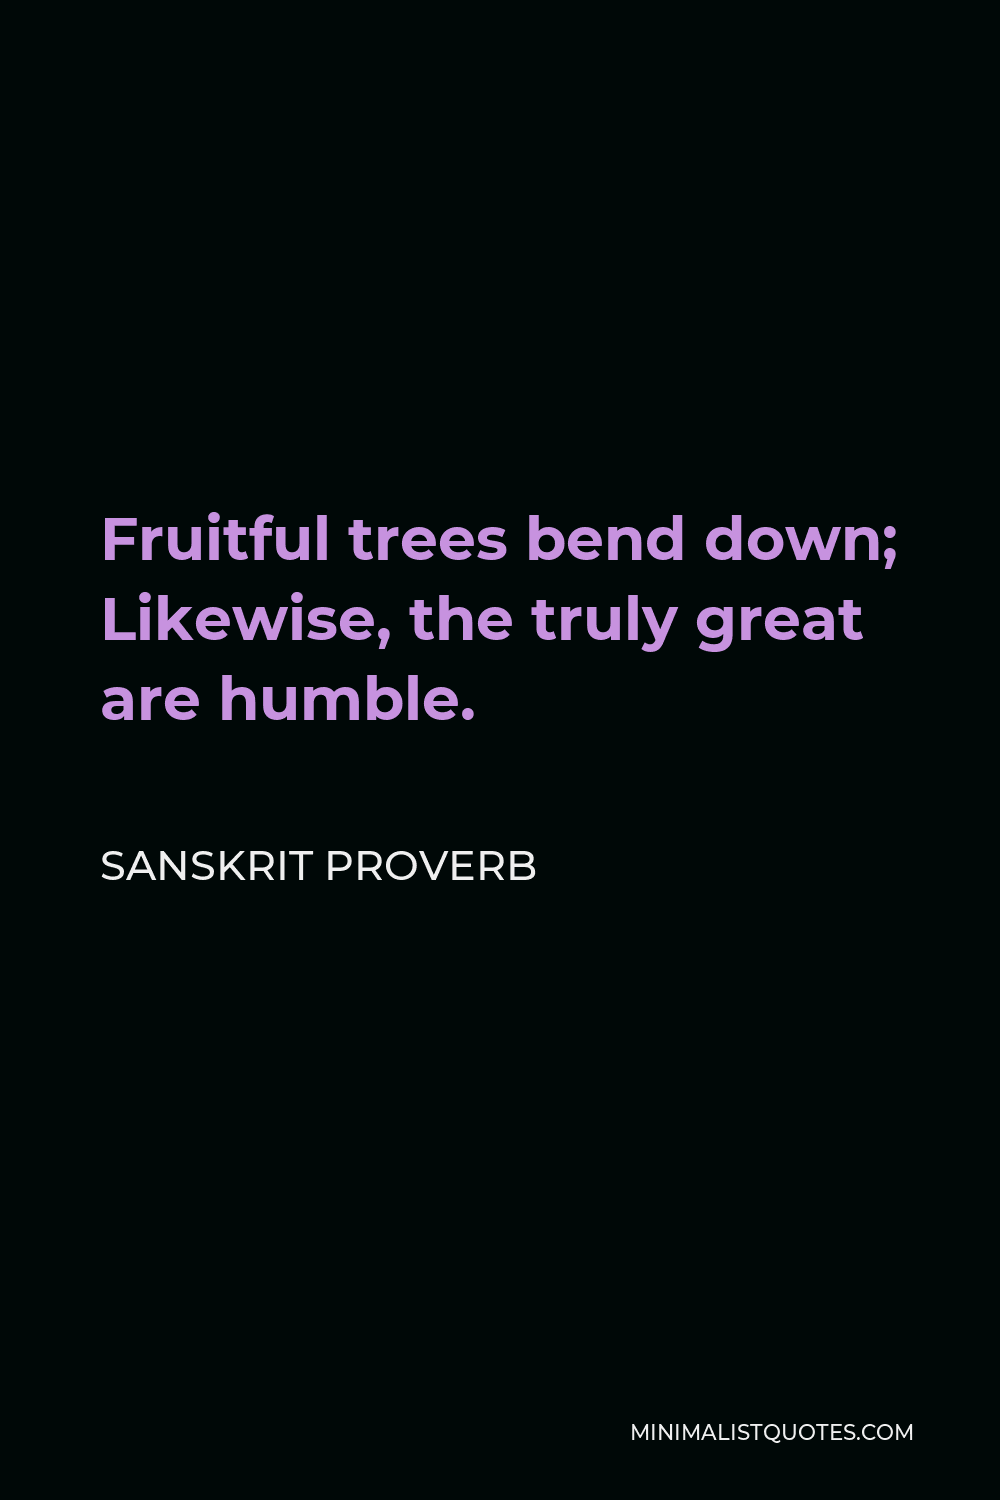 Sanskrit Proverb Quote - Fruitful trees bend down; Likewise, the truly great are humble.